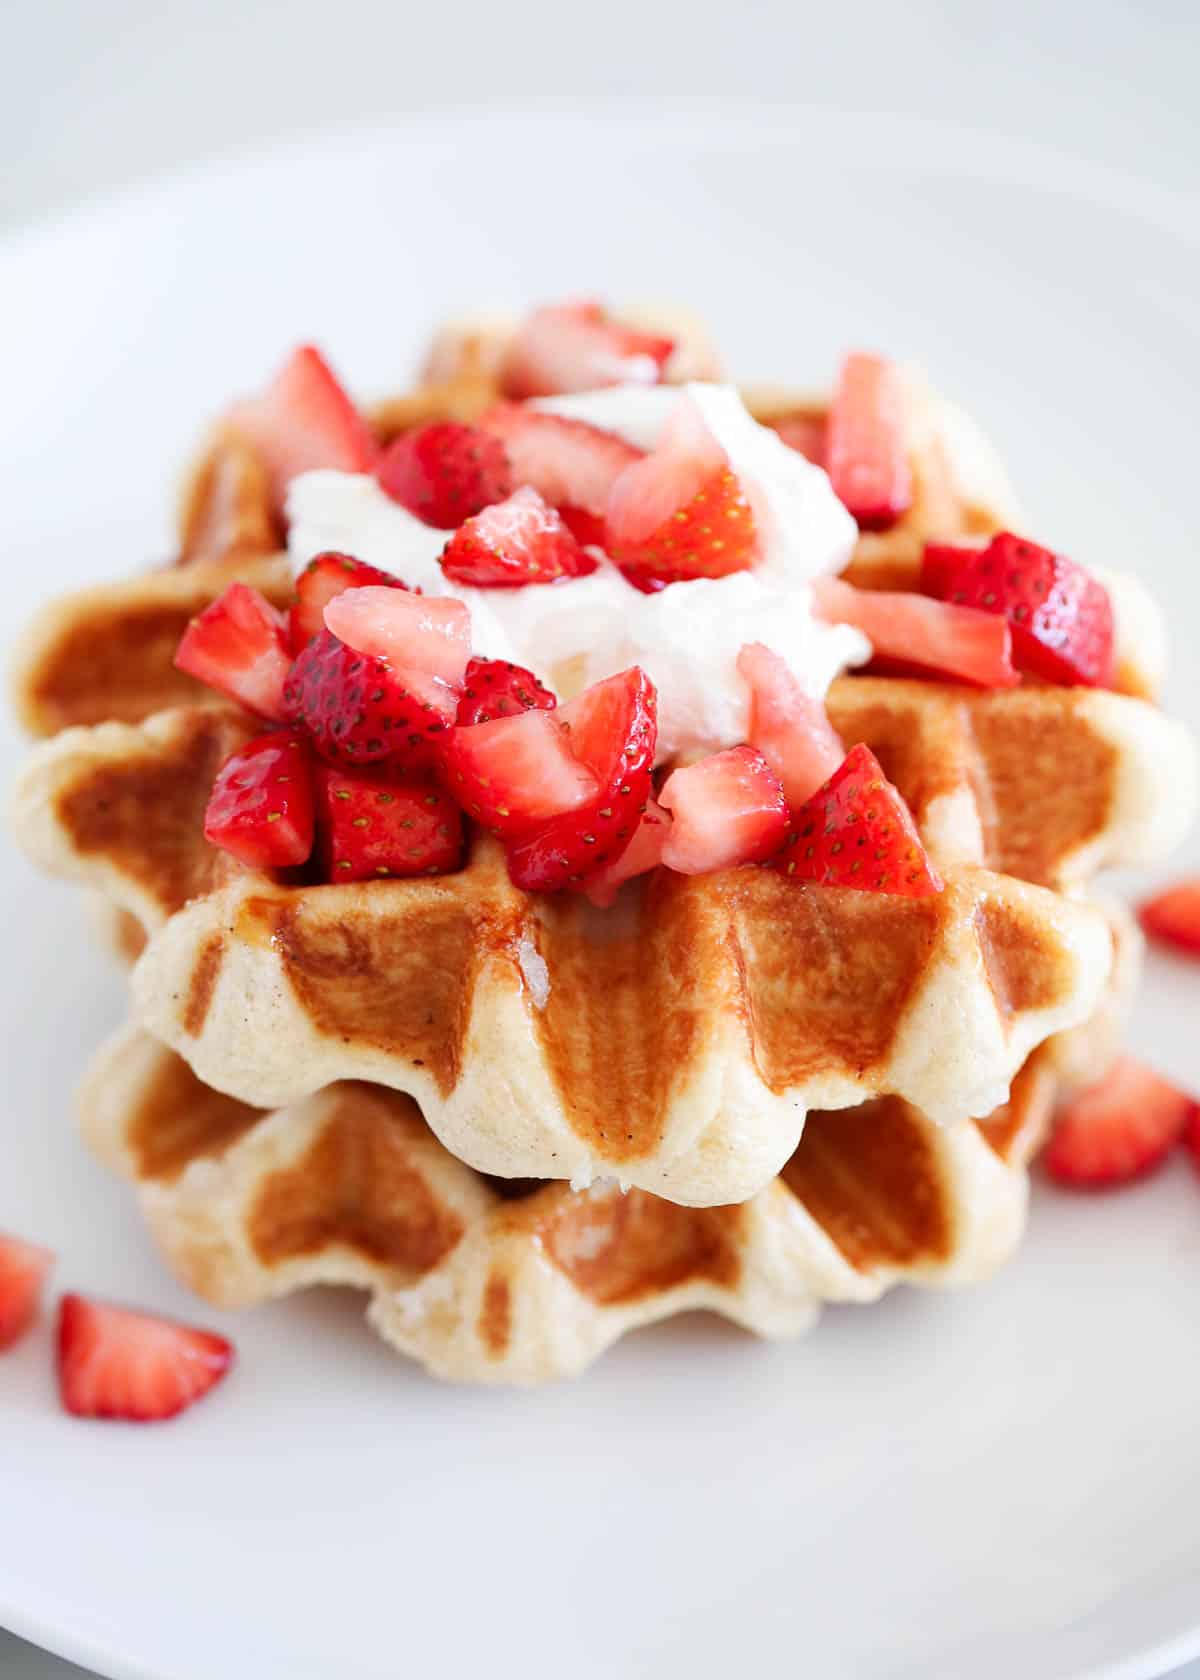 Liege waffles on a white plate with strawberries.